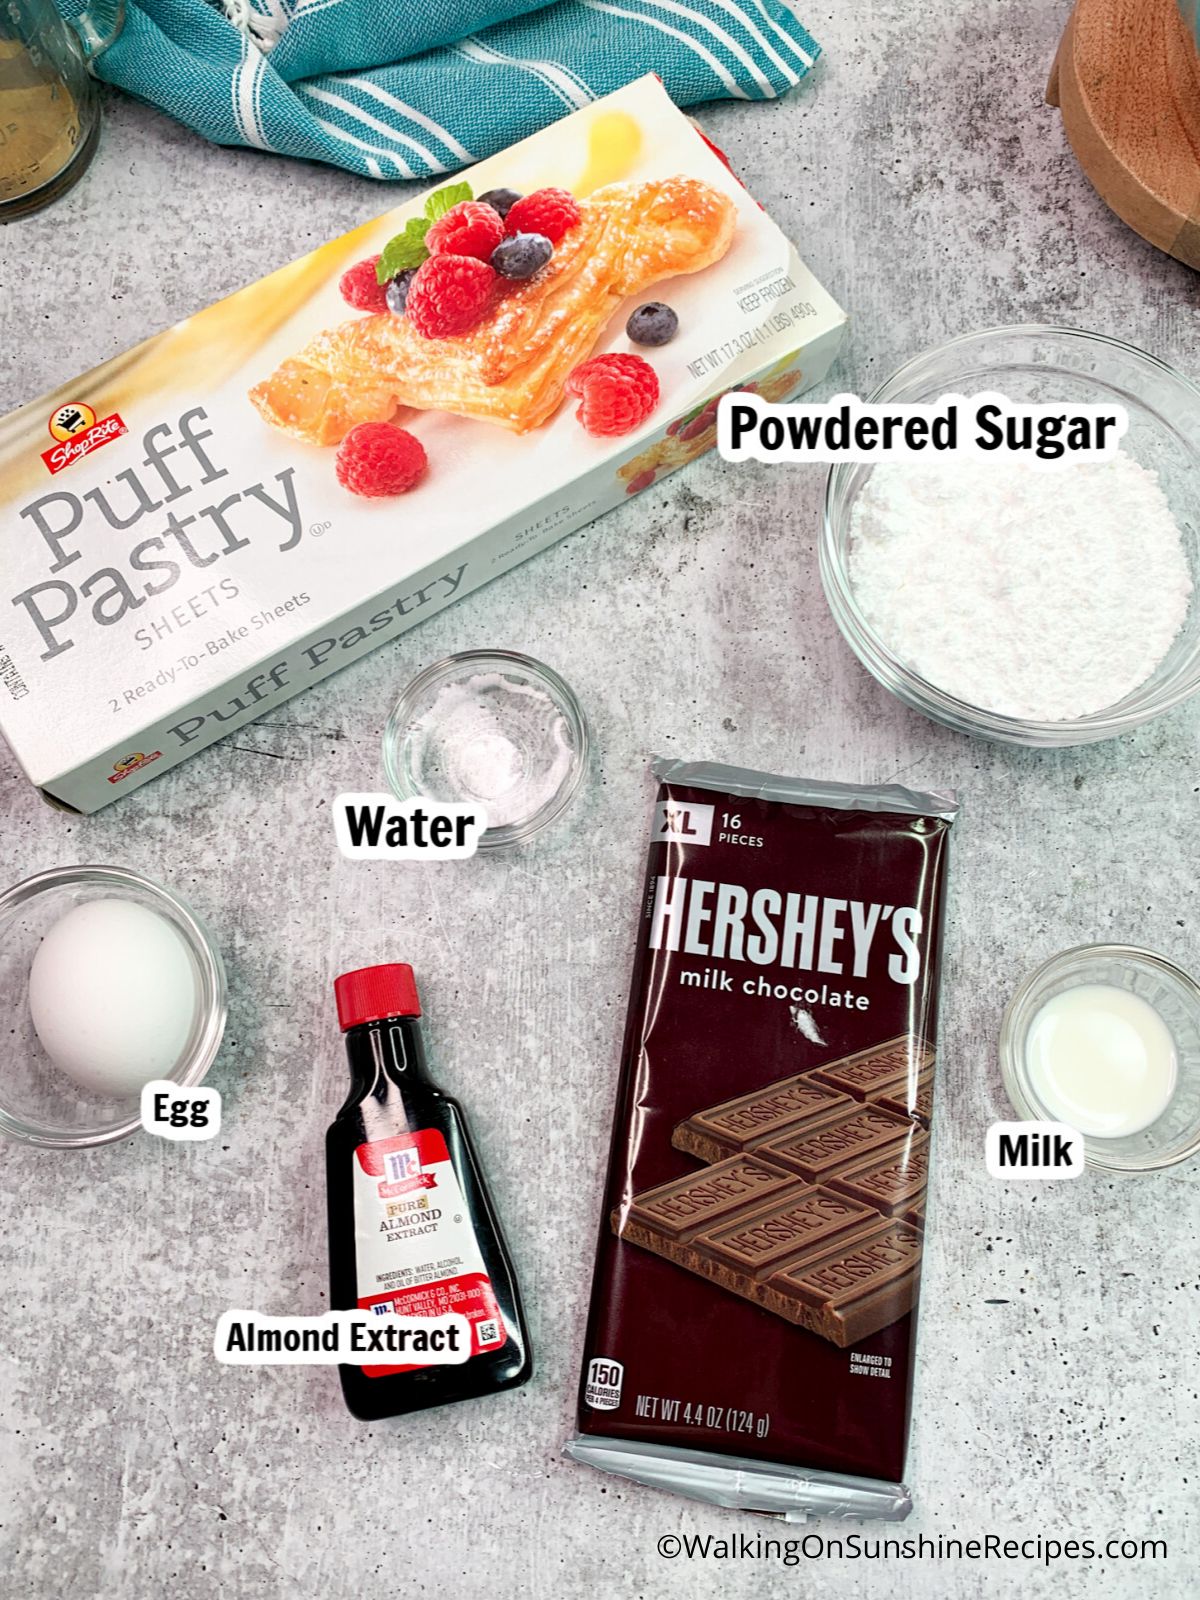 Ingredients for Chocolate Puff Pastry Danish.